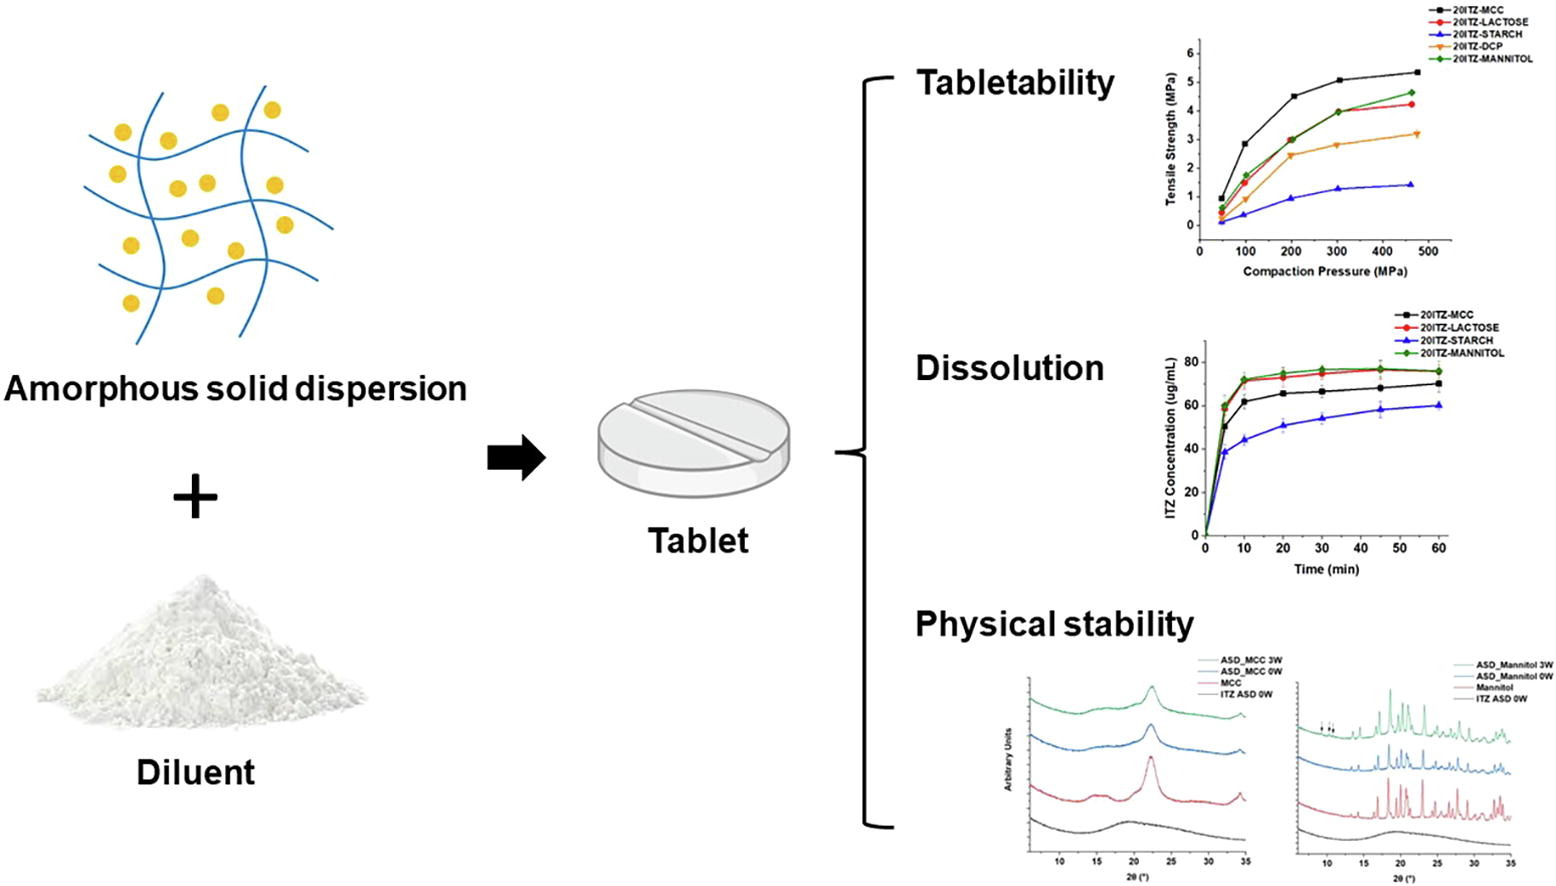 The impact of diluents on the compaction, dissolution, and physical stability of amorphous solid dispersion tablets